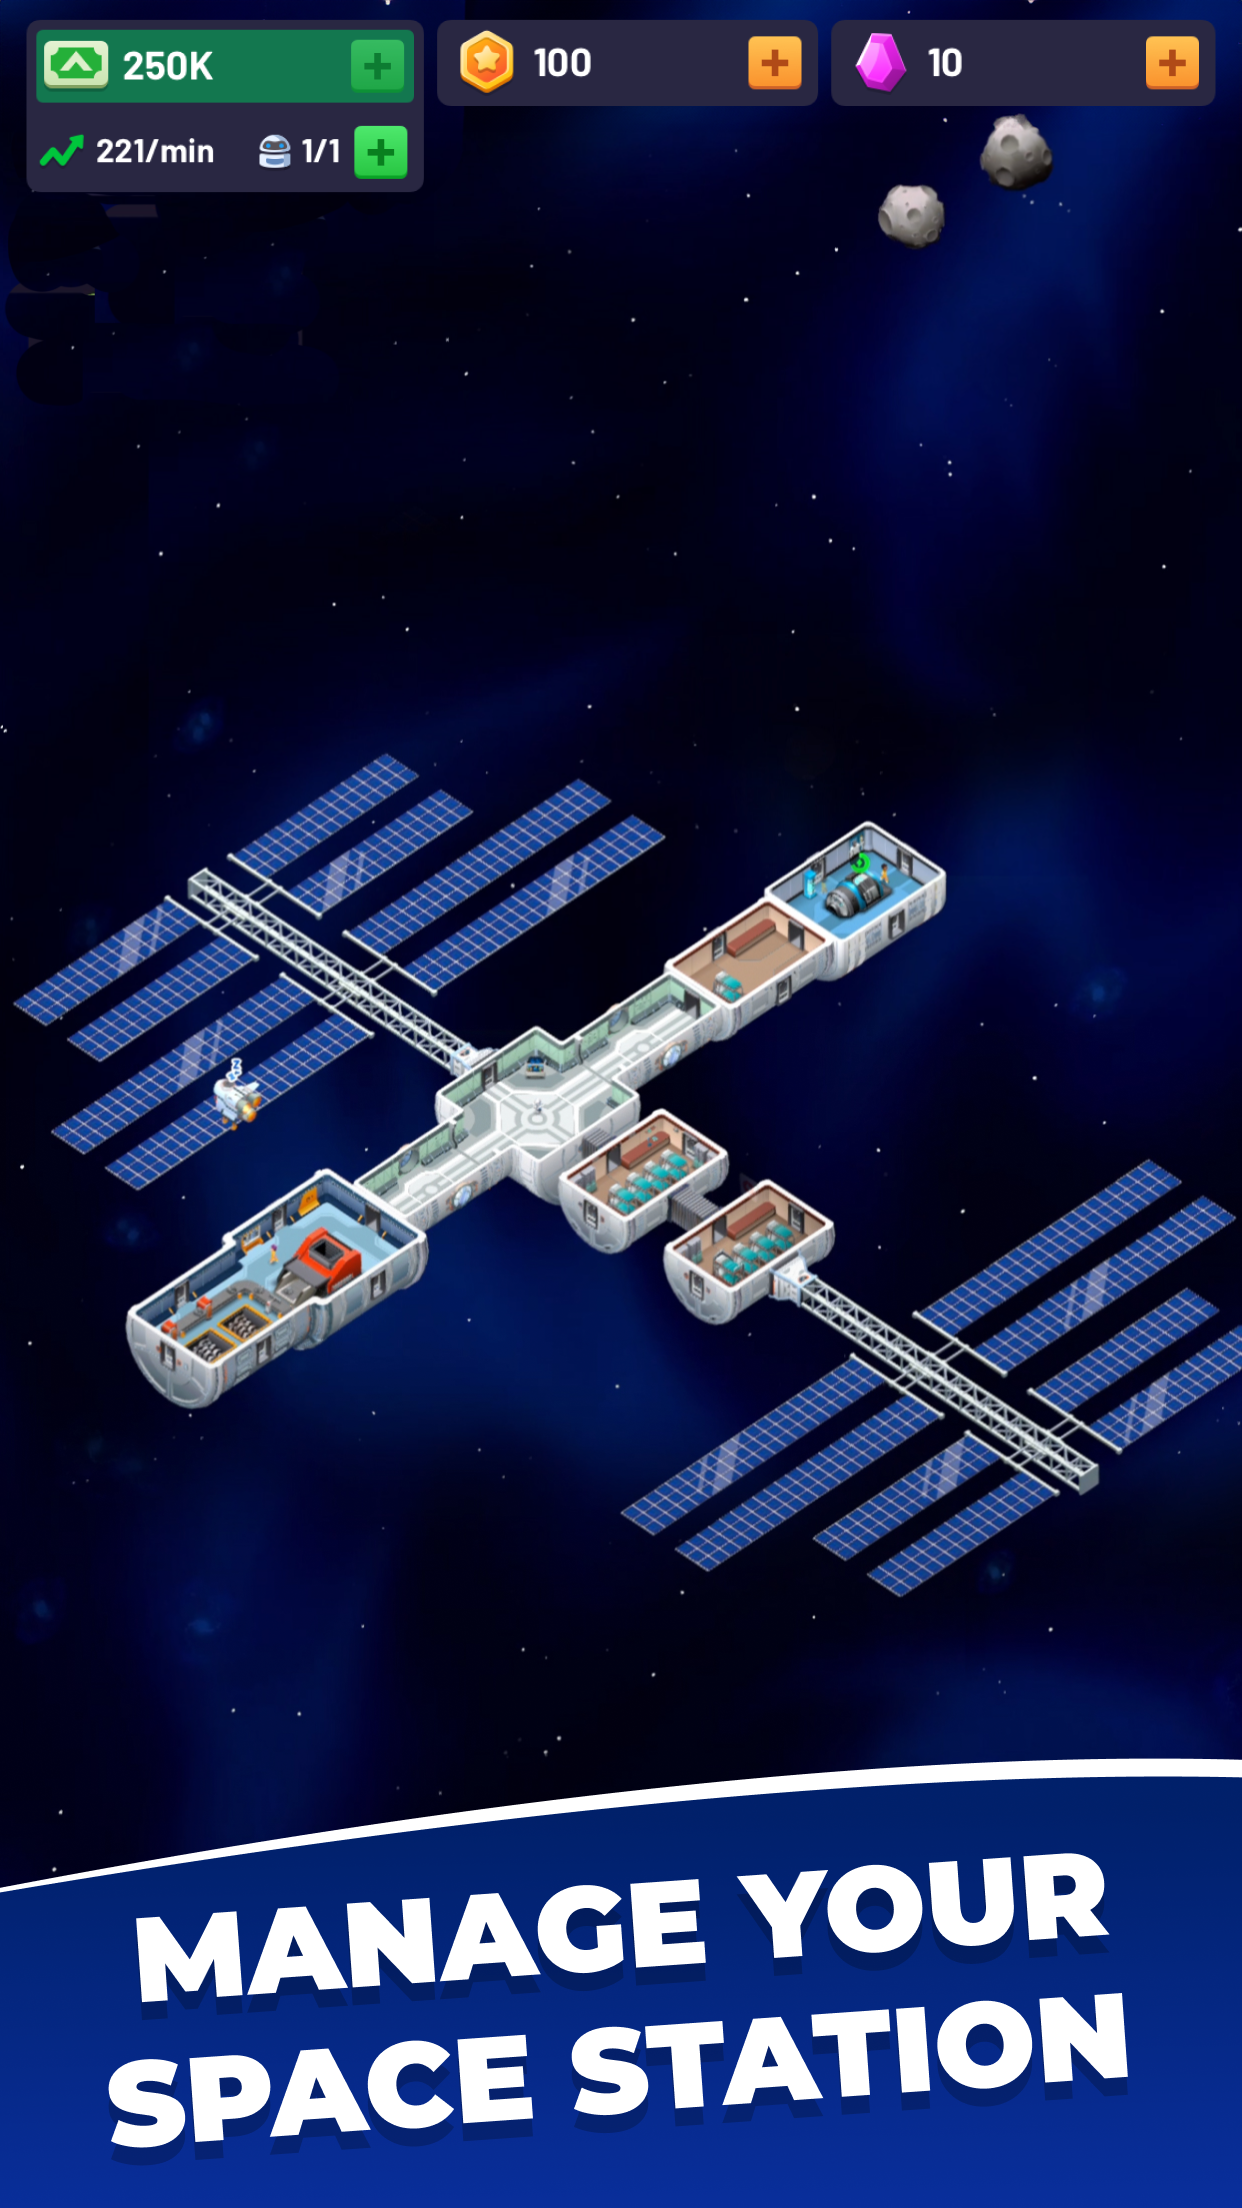 Space station tycoon. Idle Space Station Tycoon много денег и кристаллов.